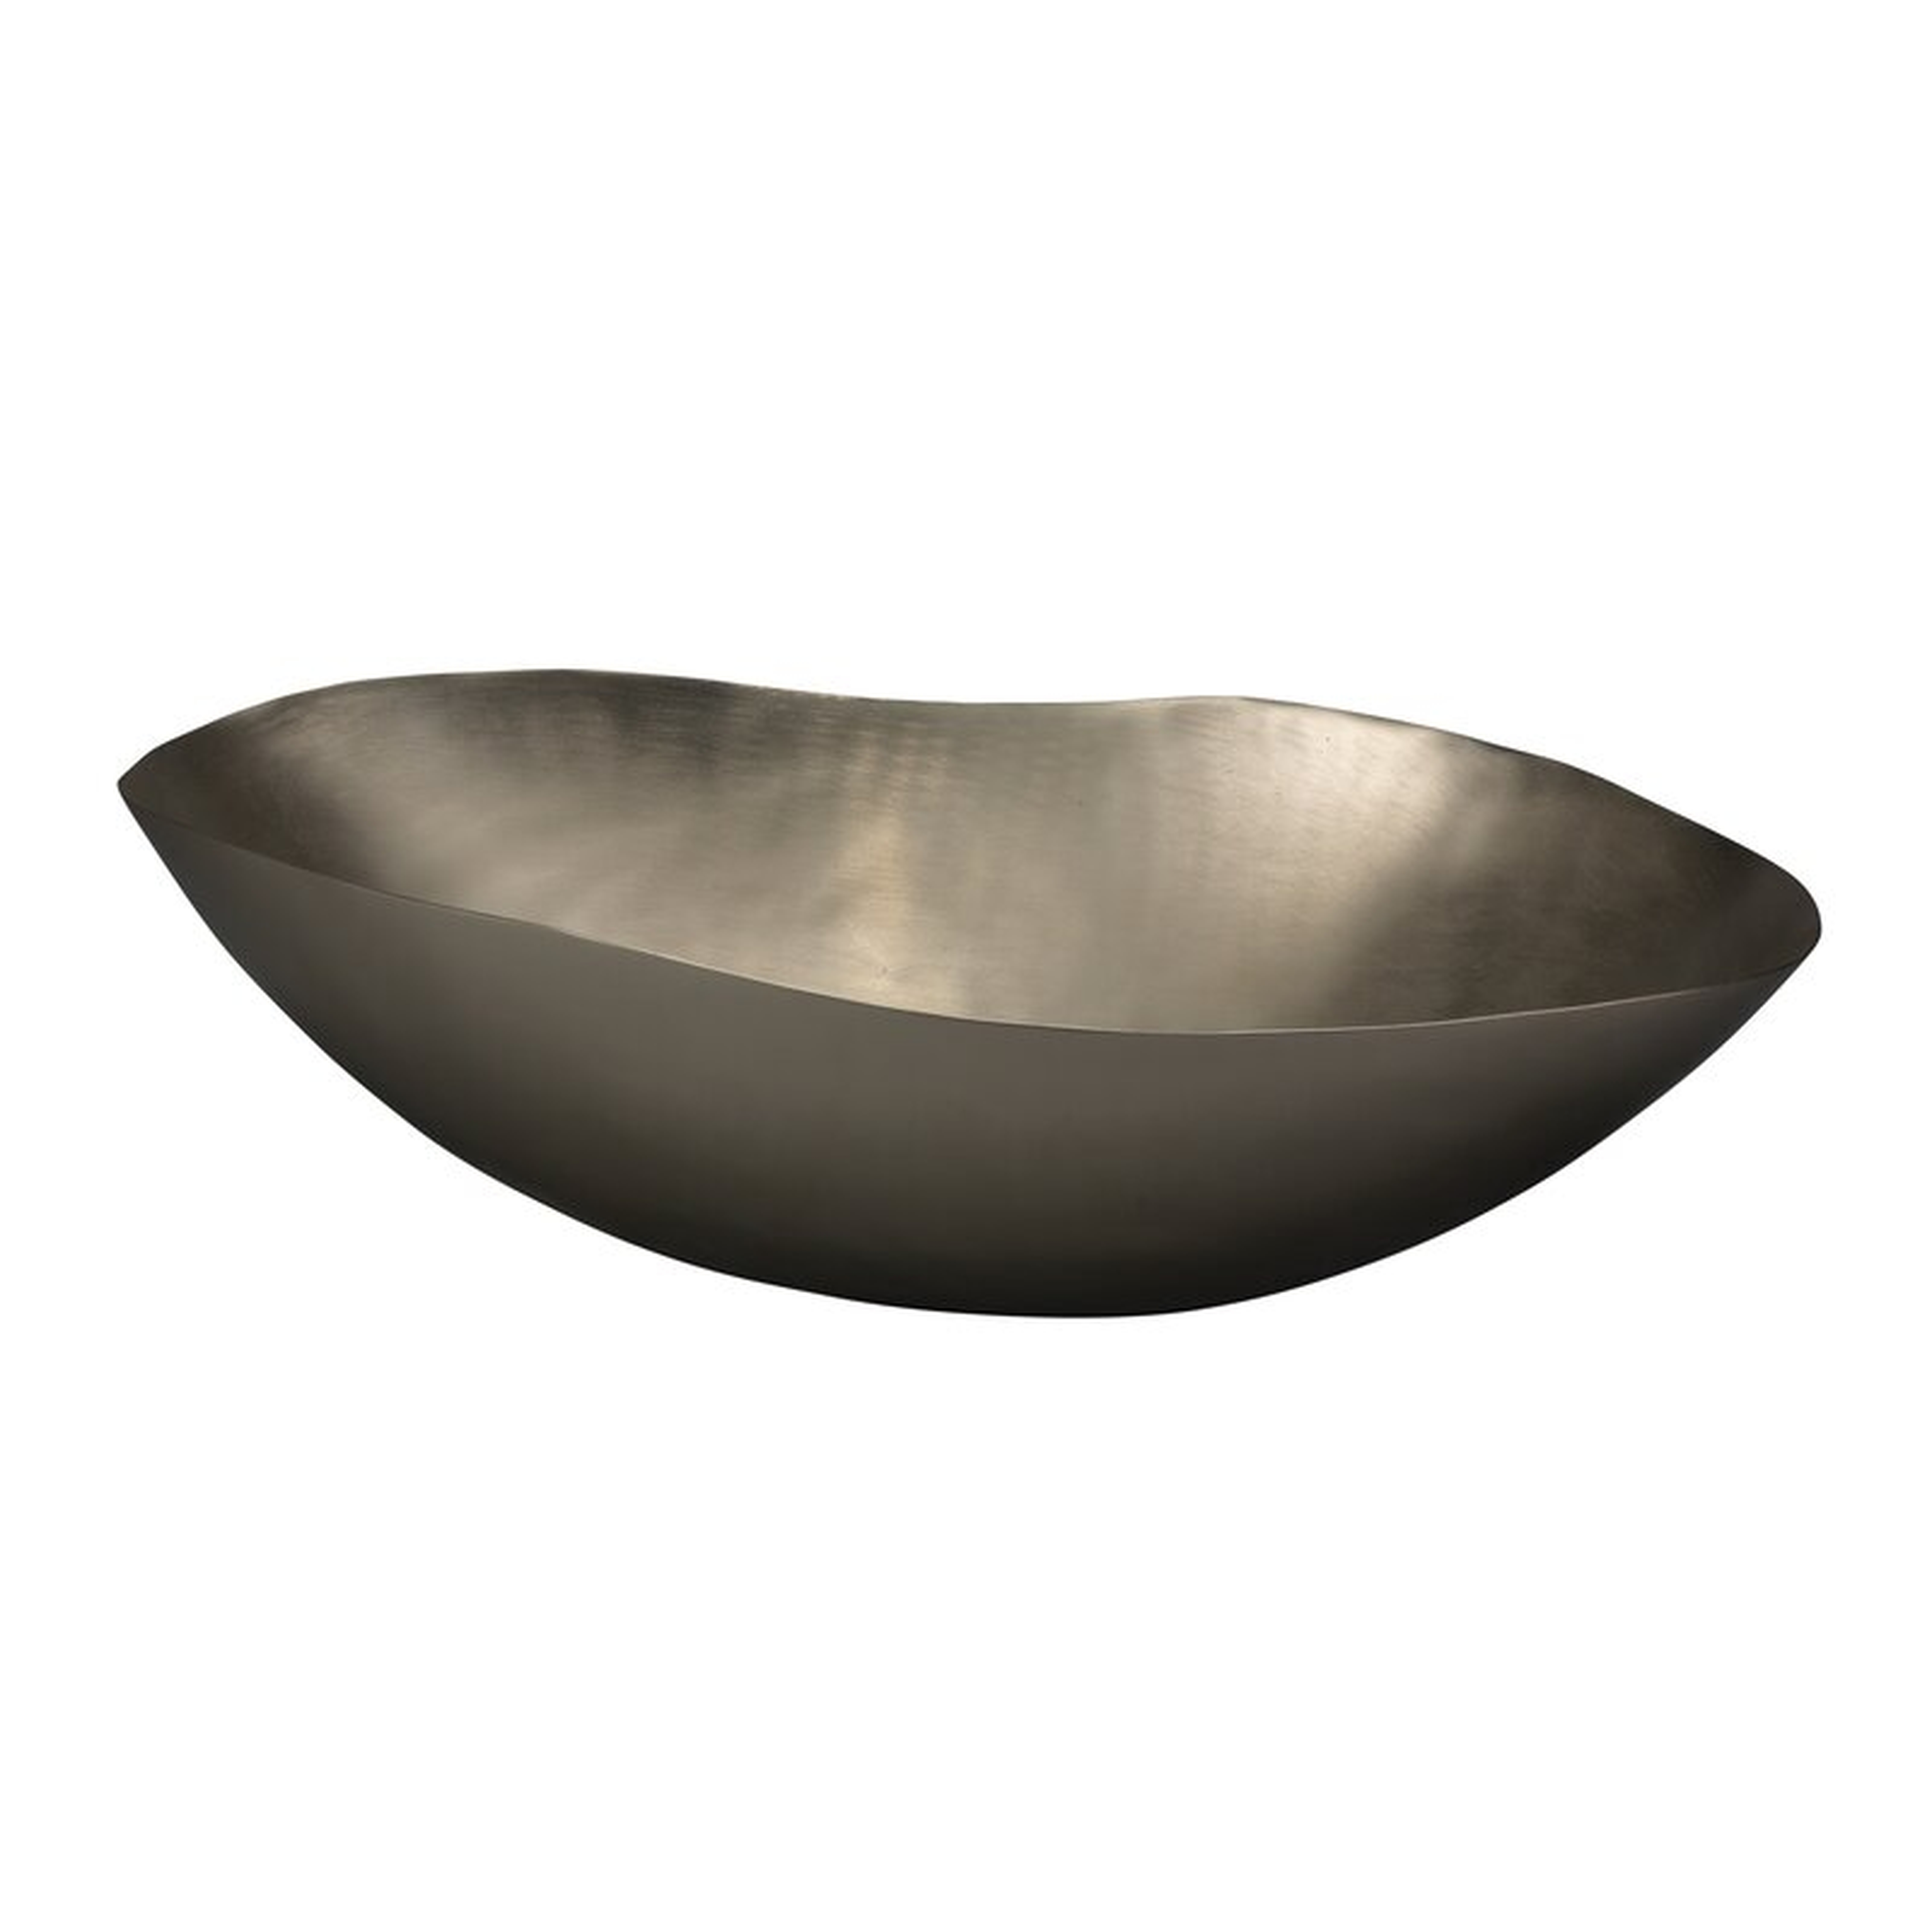 Oasis Metal Global Inspired Decorative Plate in Matte silver Size: 5.25" H x 11.5" W x 11.5" D - Perigold